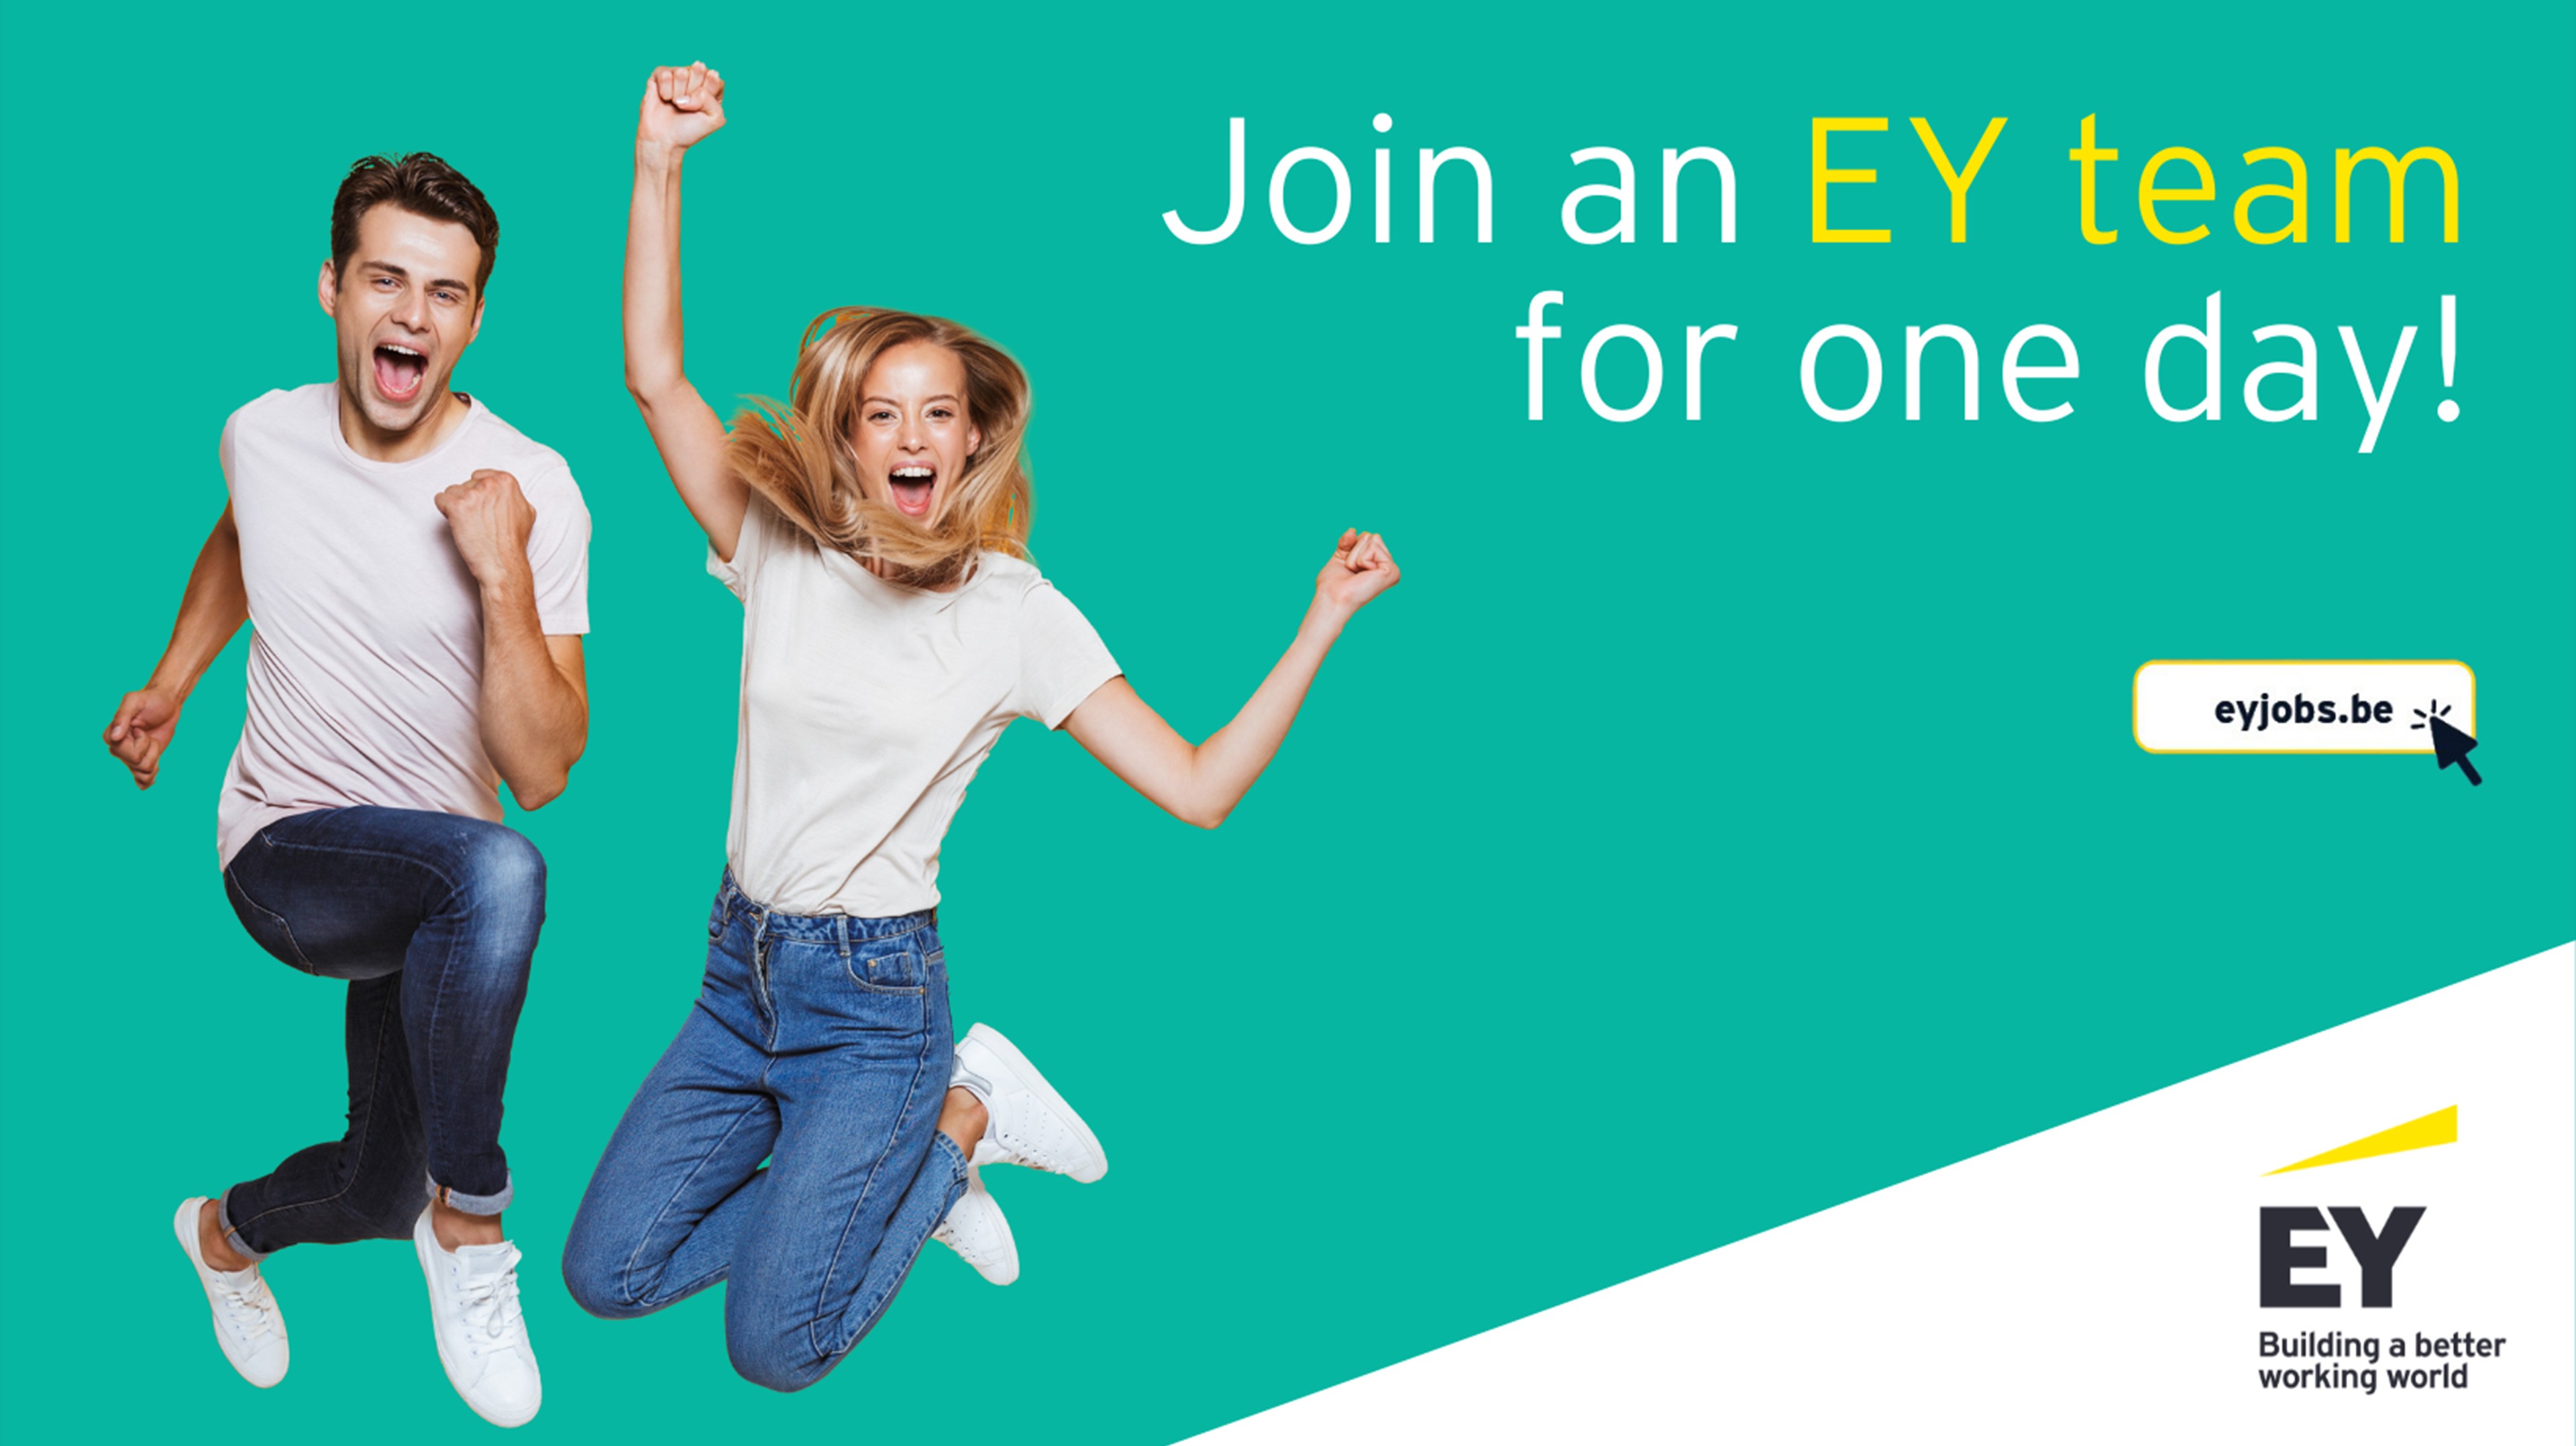 Join an EY team for one day - promotional banner